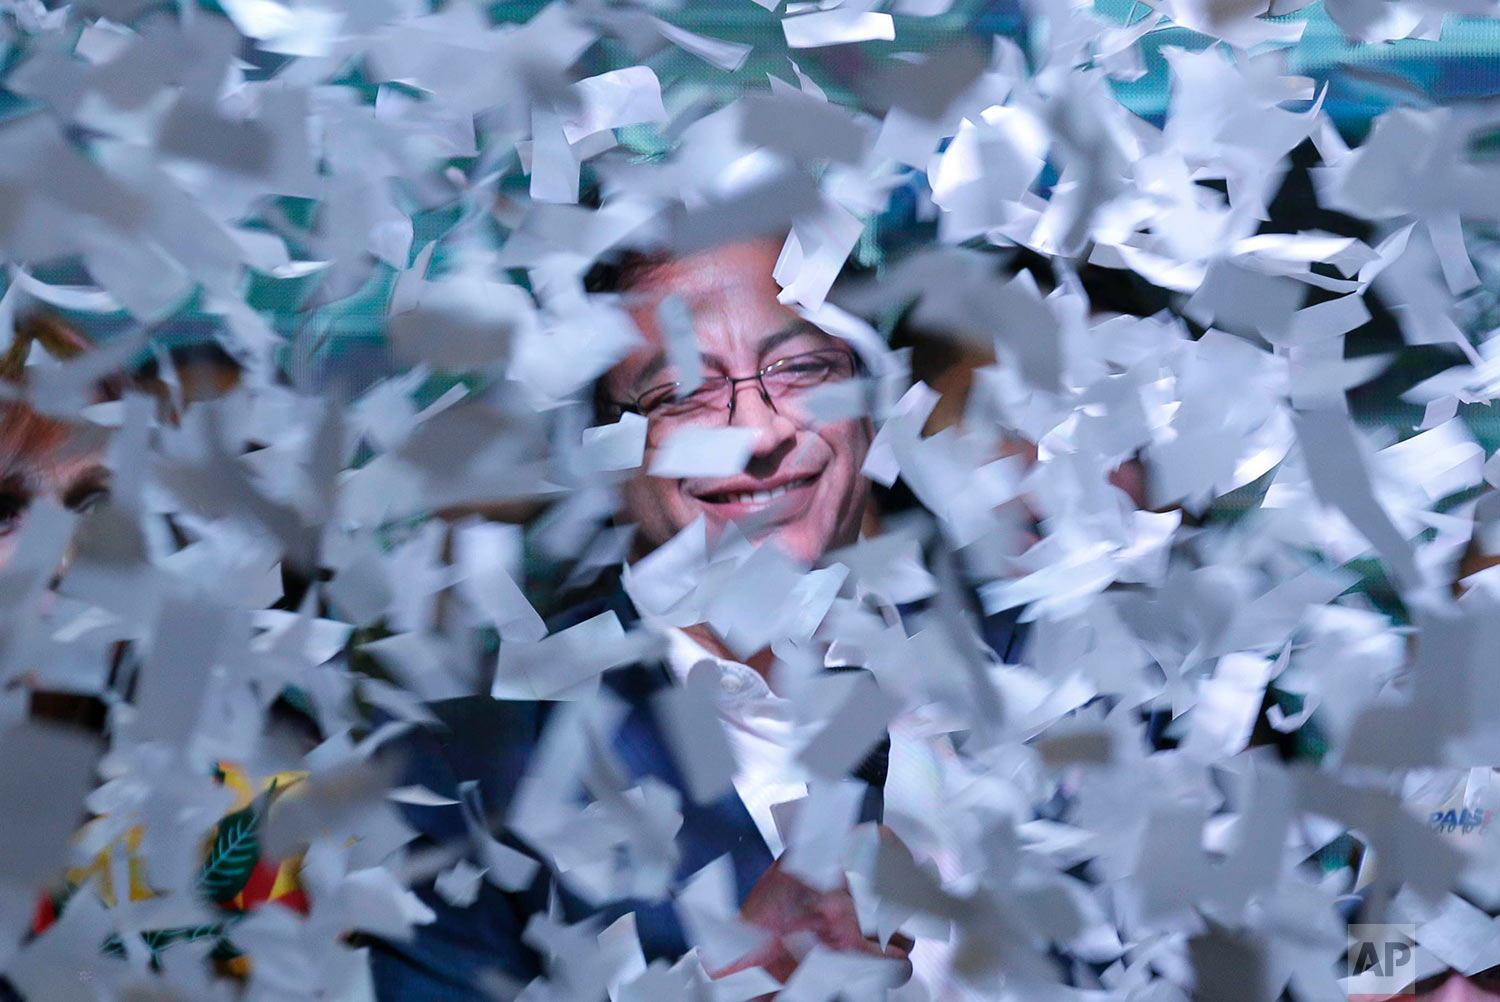  Presidential candidate Gustavo Petro is surrounded in ticker tape as he speaks to supporters after his rival Ivan Duque won the election in Bogota, Colombia, June 17, 2018. (AP Photo/Martin Mejia) 